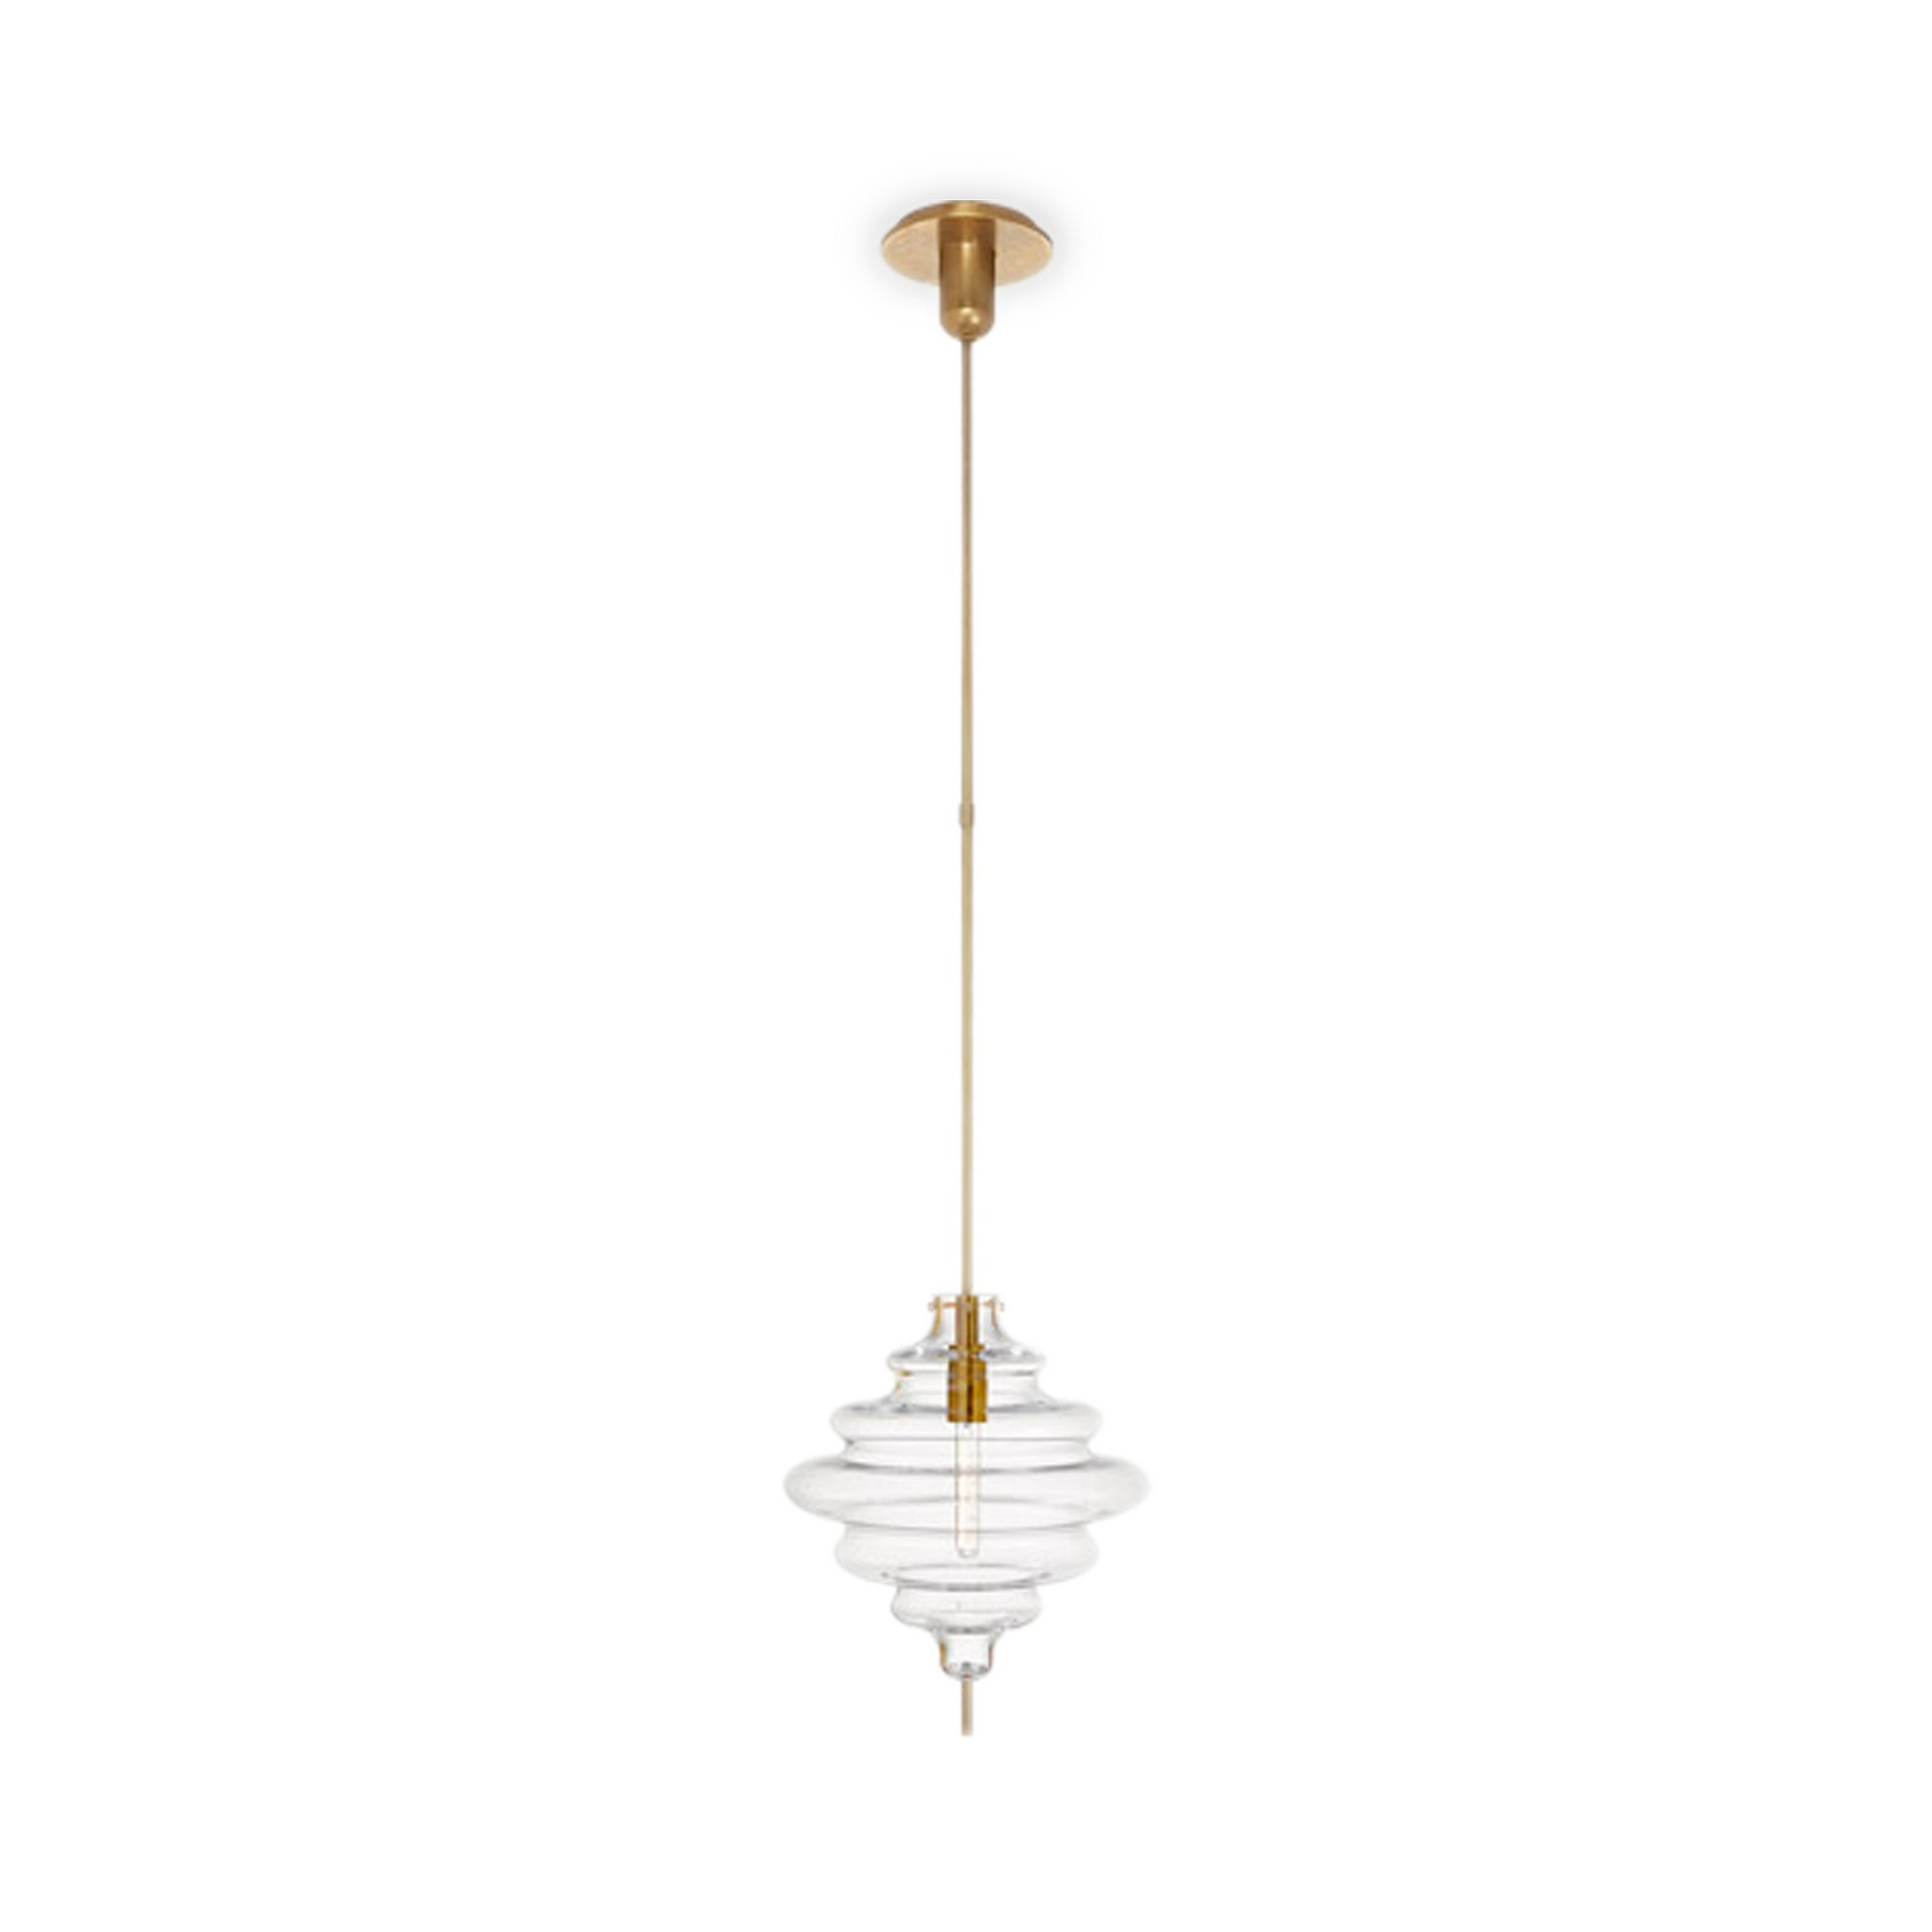 The Tableau Medium Pendant features a distinctive design and  soulful vibe.